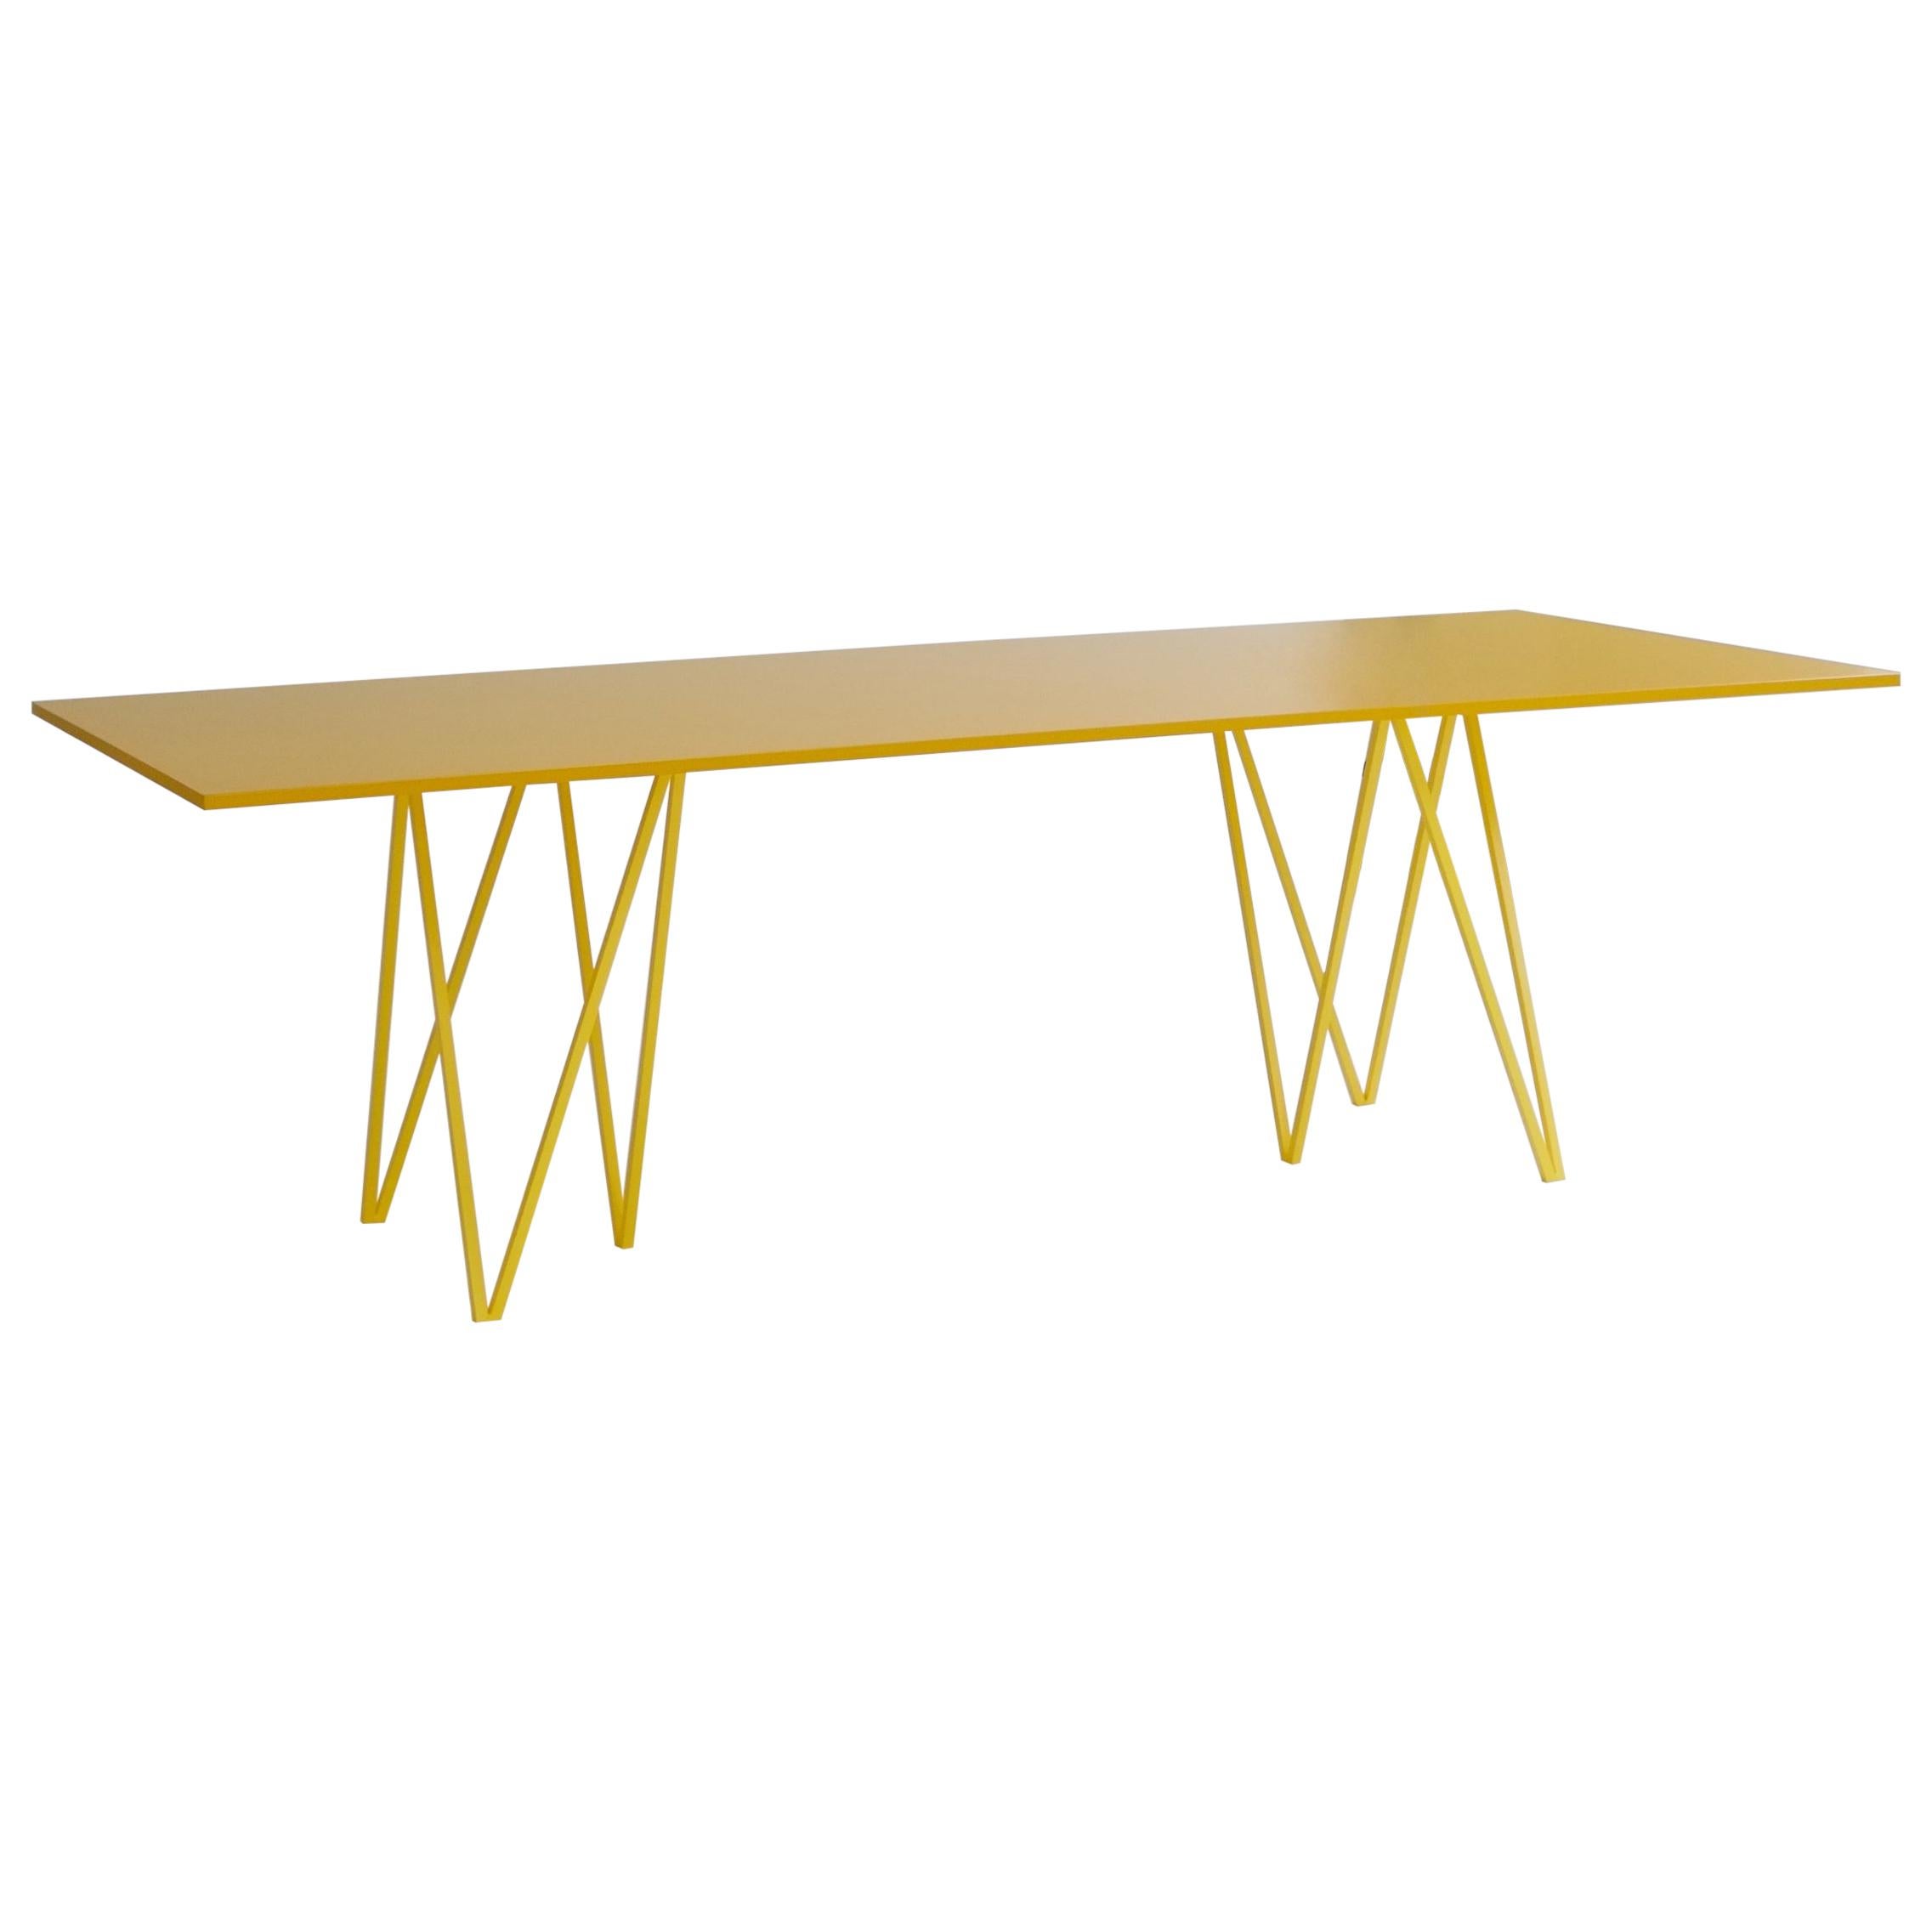 Large Architectural Yellow ZigZag Dining Table, Customisable